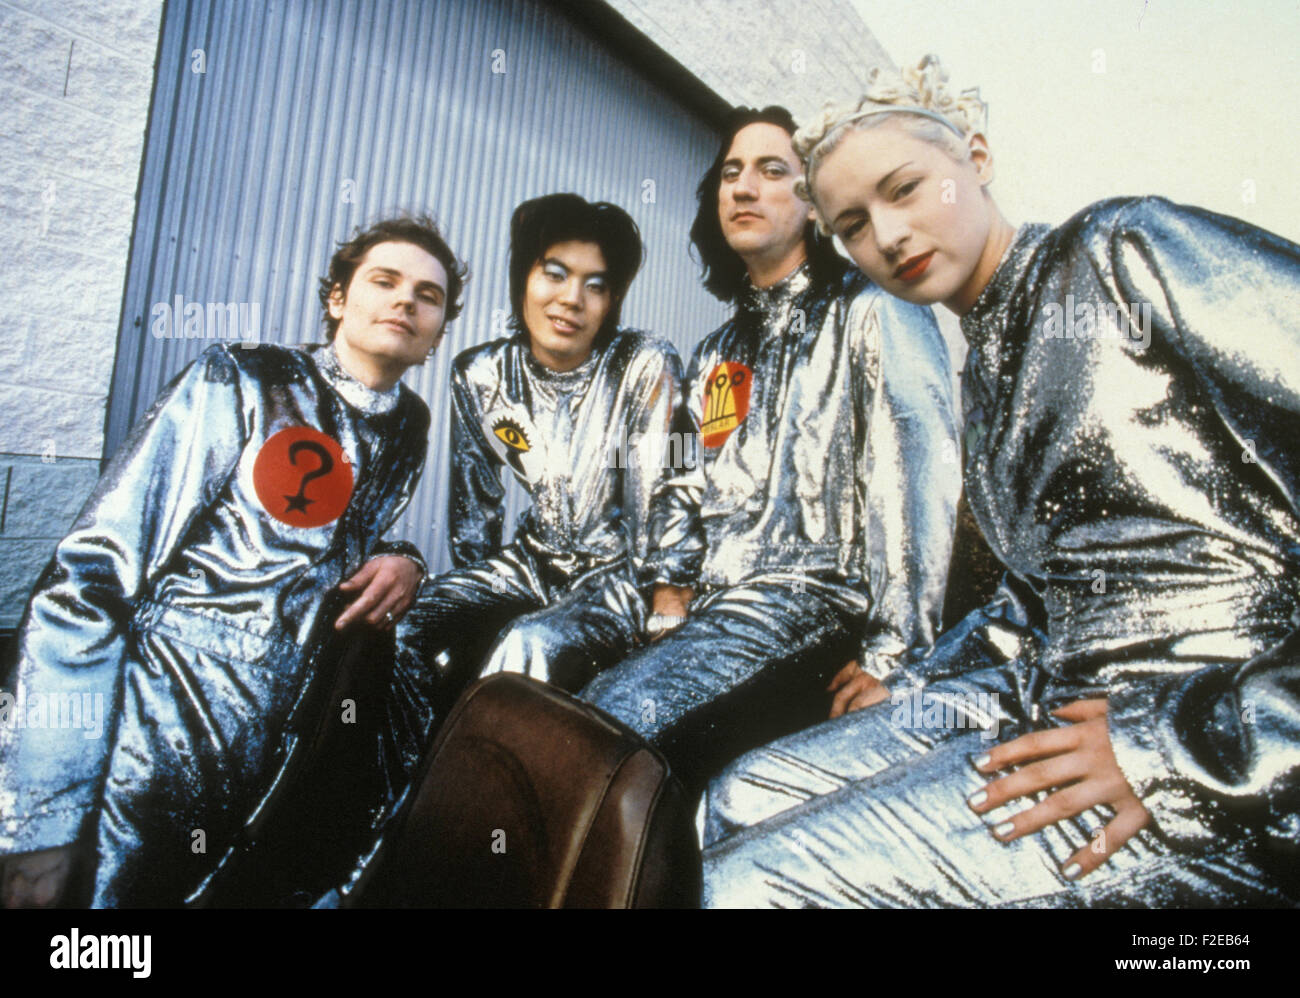 The Smashing Pumpkins Promotional Hi Res Stock Photography And Images